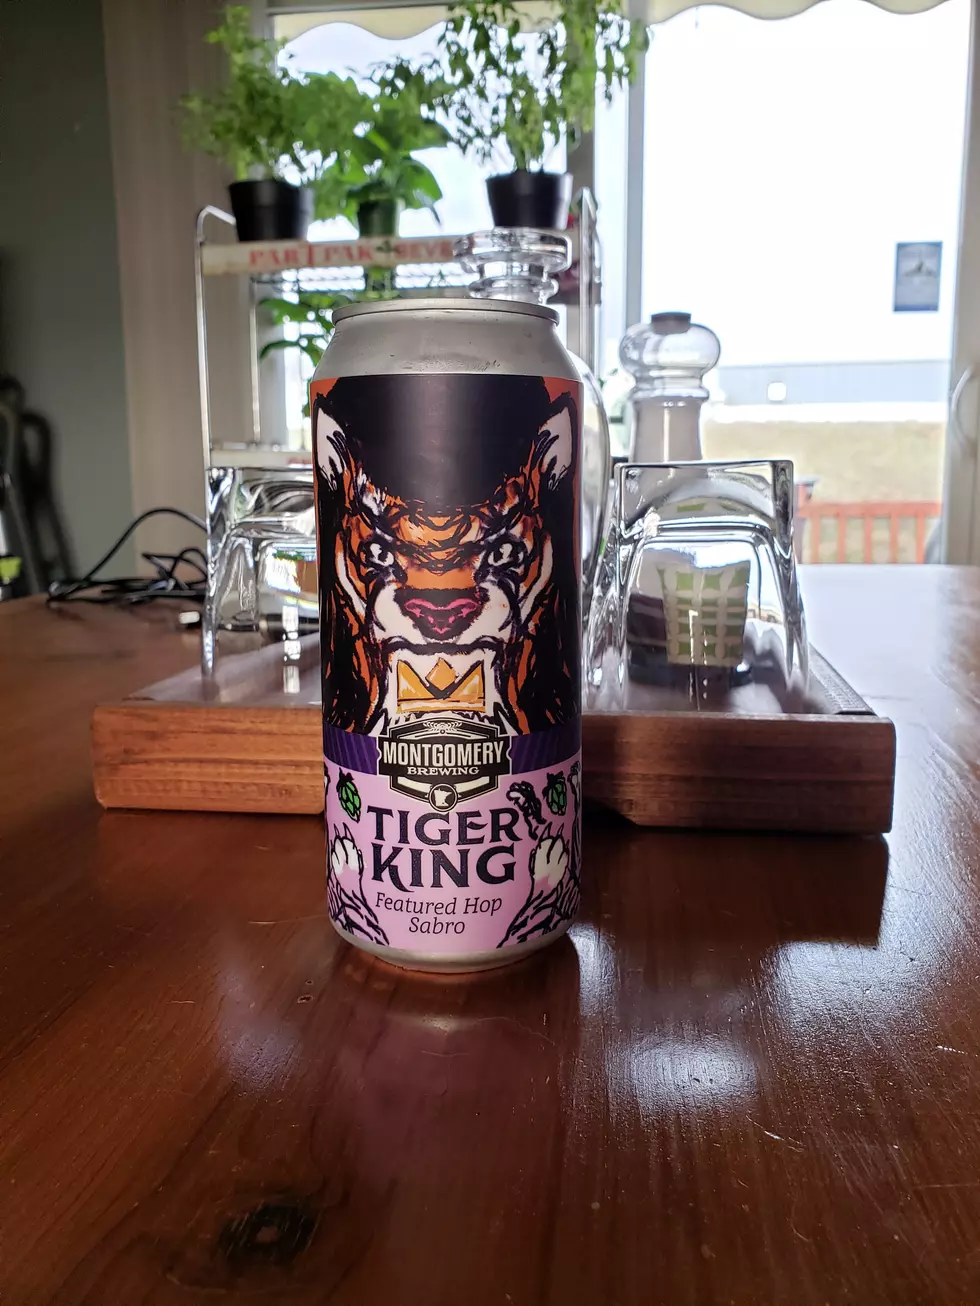 Local Brewery Creates ‘Tiger King’ Beer